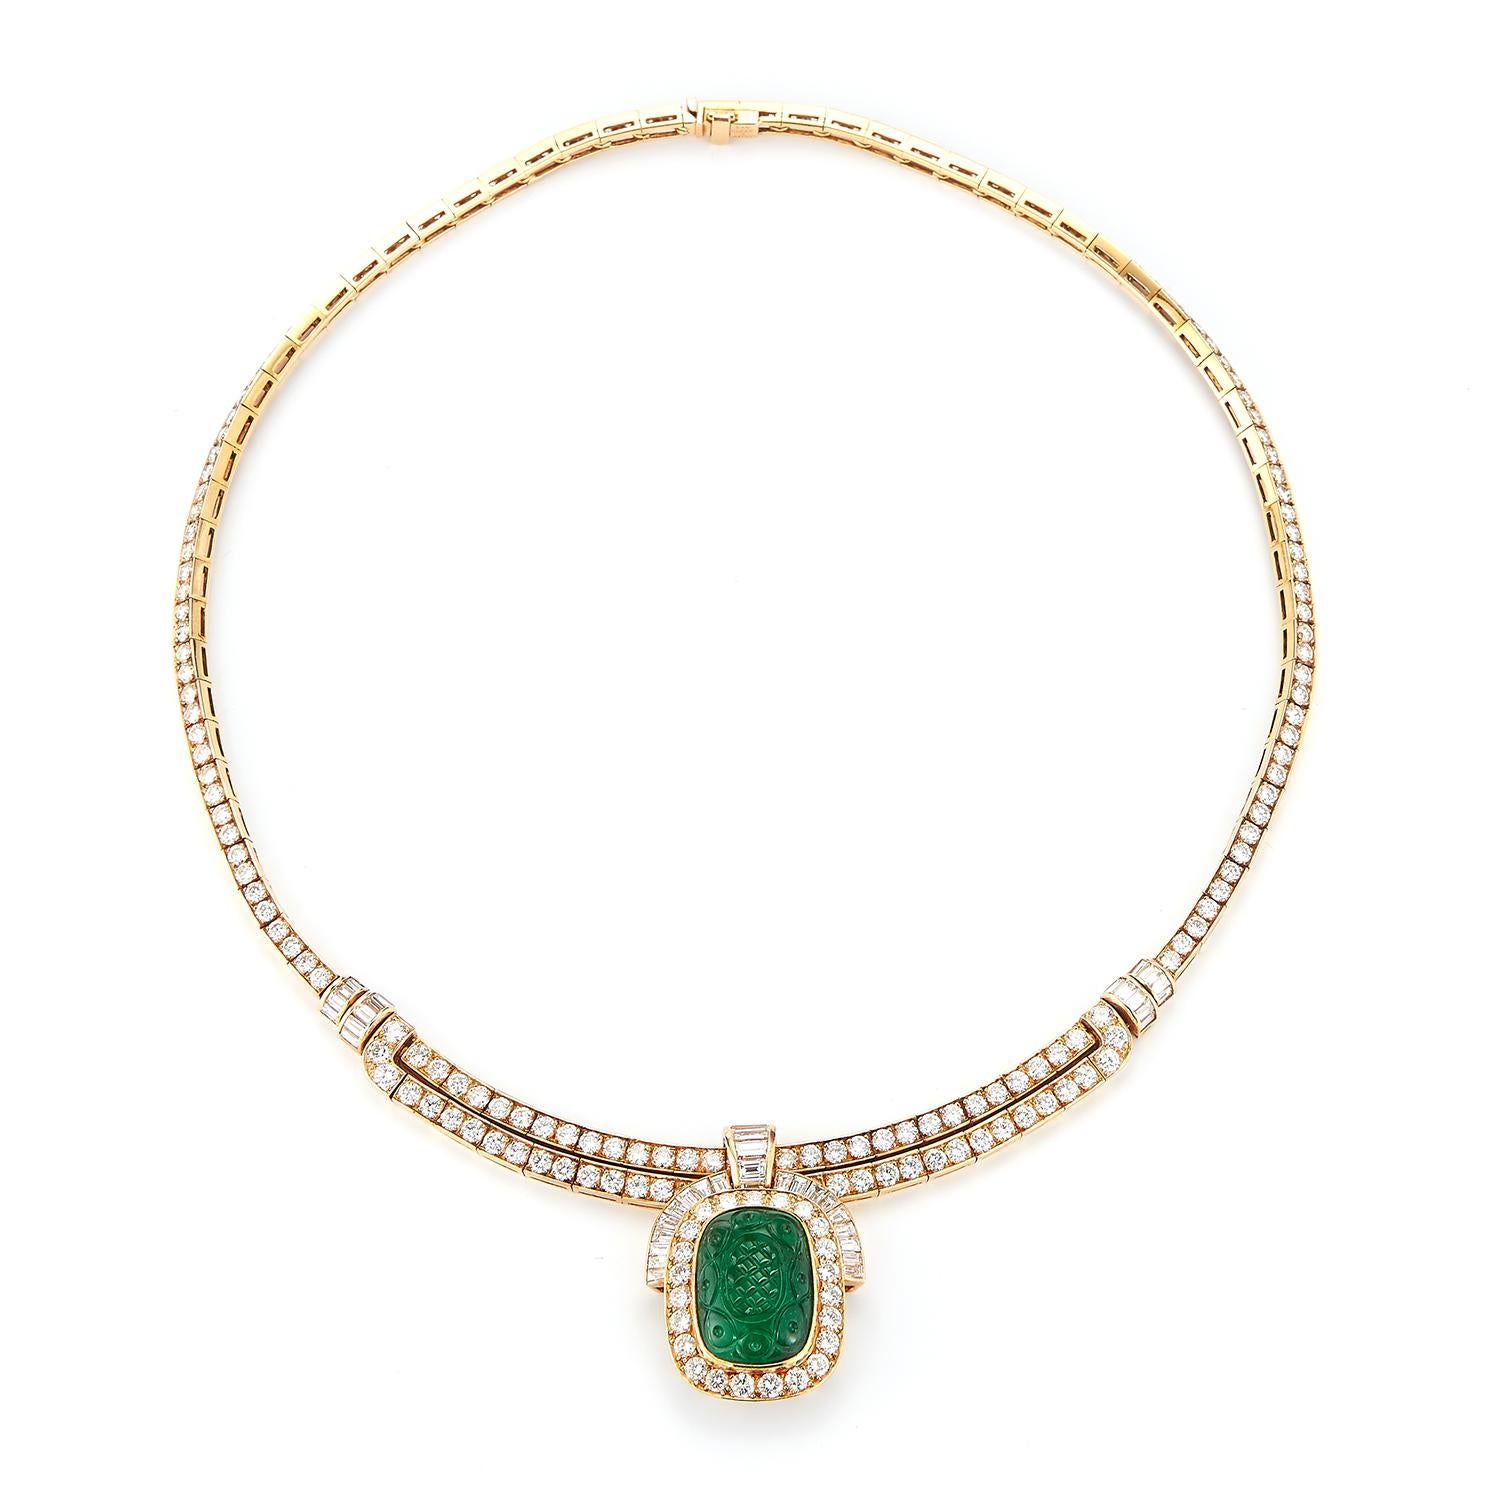 Van Cleef and Arpels Carved Emerald Diamond Necklace
Approximately 13 carats of diamonds
1 magnificent hand carved emerald 
Signed Van Cleef & Arpels and numbered
Measurements: 14.5